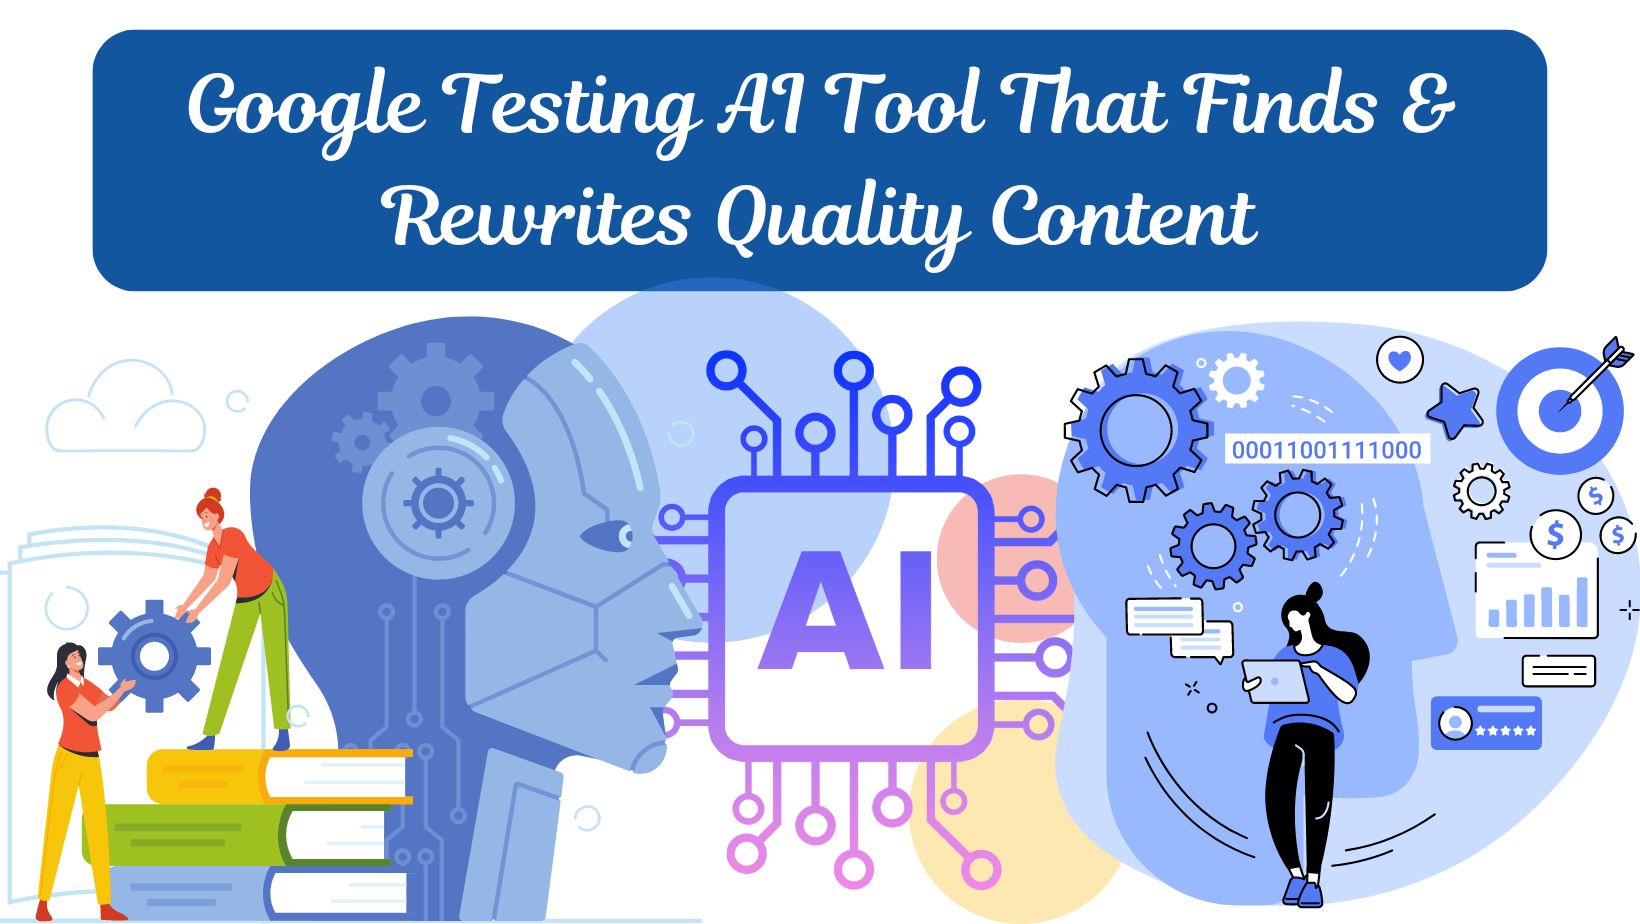 Google Testing AI Tool That Finds & Rewrites Quality Content